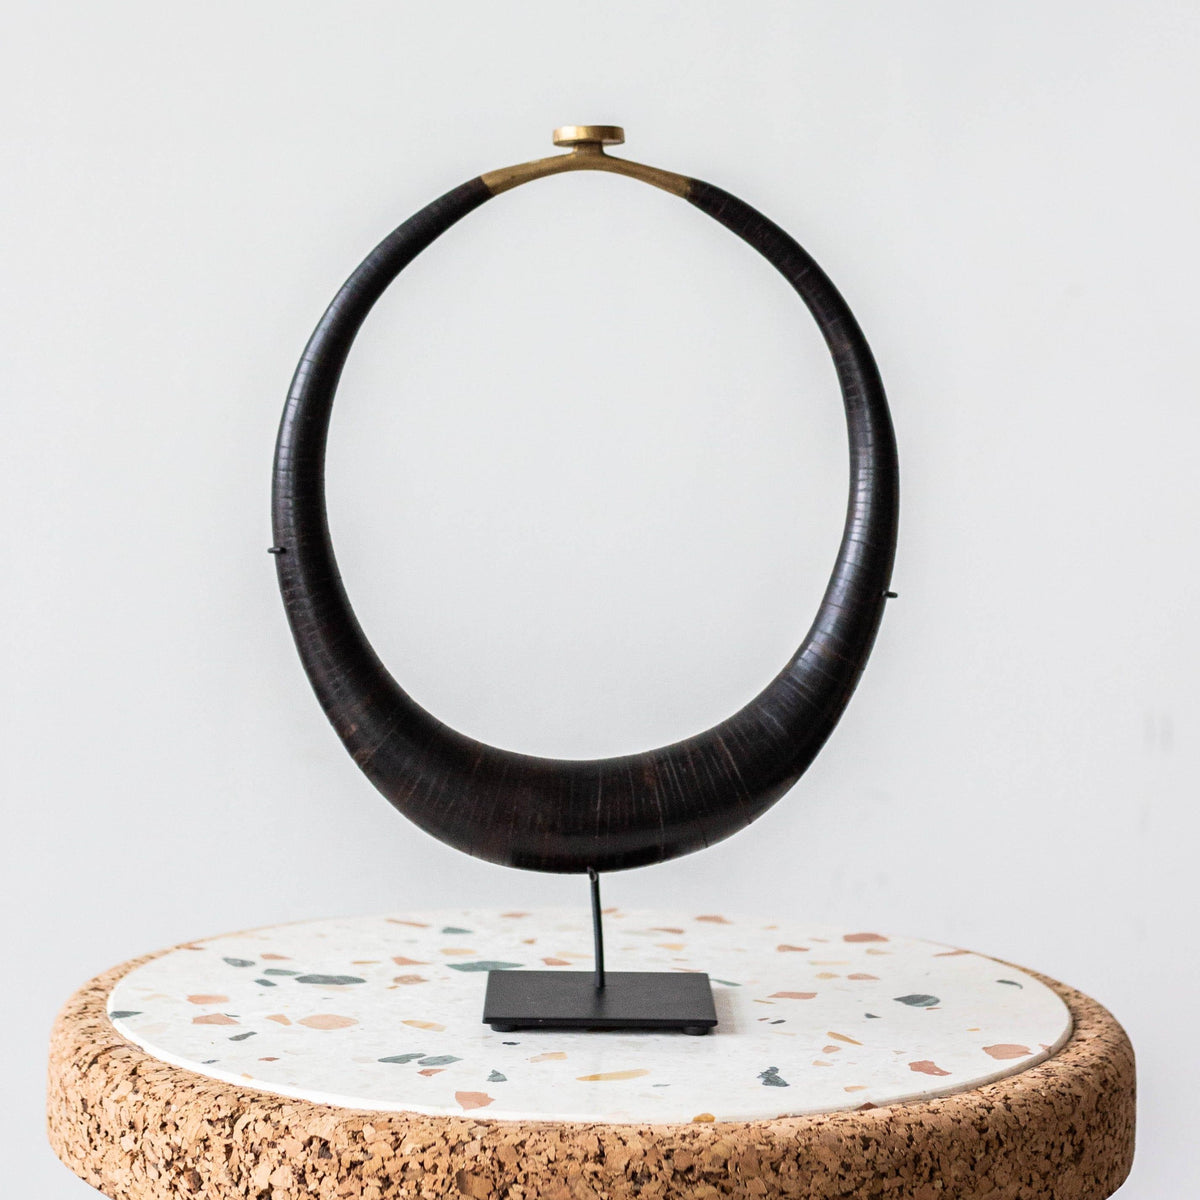 Mahogany Coconut Shell Necklace kanju interiors African décor mounted handcrafted collar necklace décor decorative decoration shell stand display shelf mantel table unique traditional modern stylish hand made boho accent small medium large statement indo-African home goods gift Coconut shell cocoa dark brown natural gold detail 